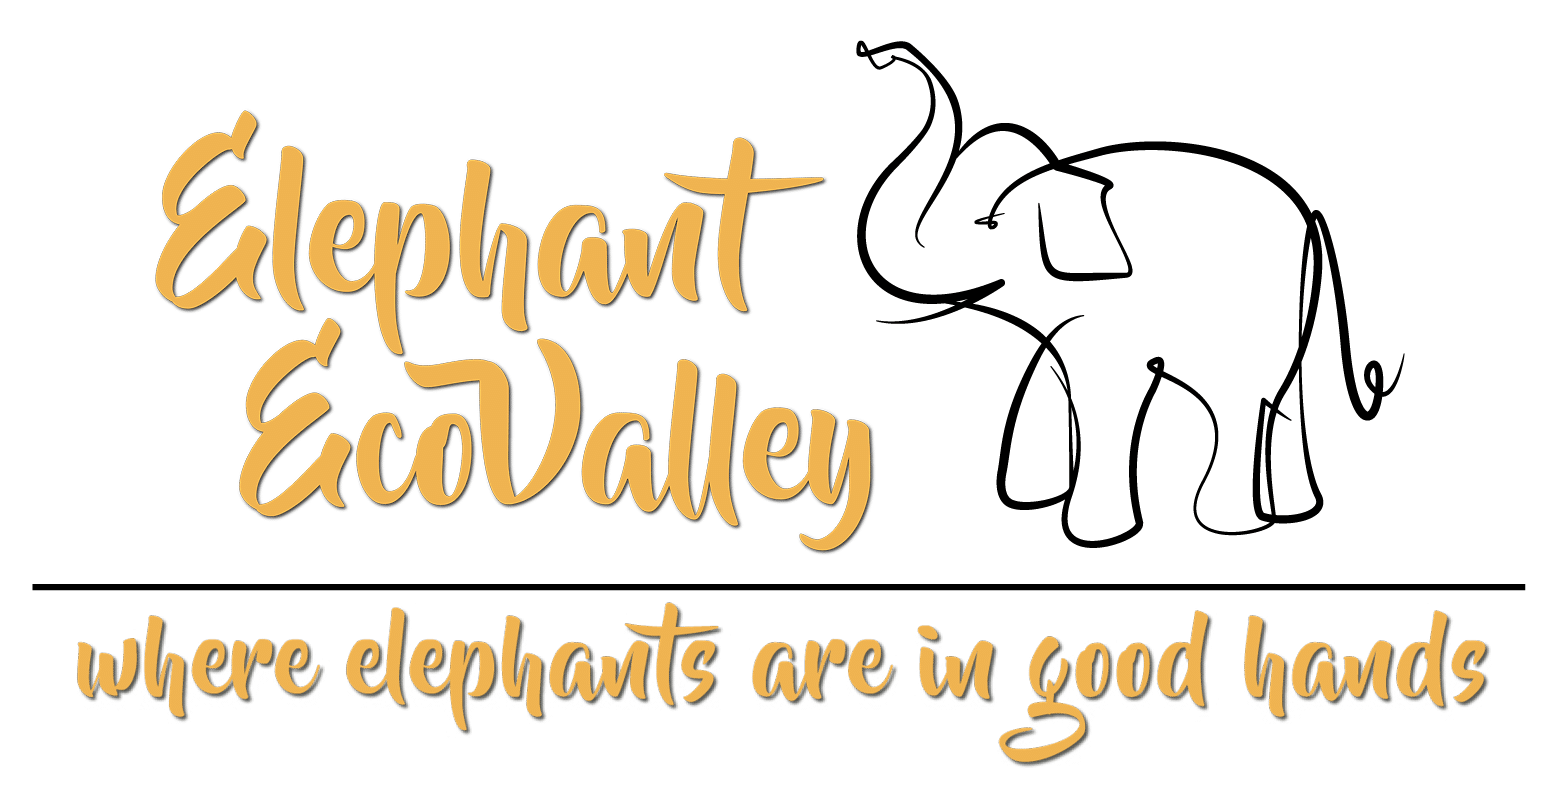 Best no riding wilderness elephant attraction in Chiang Mai where elephants are in good hands